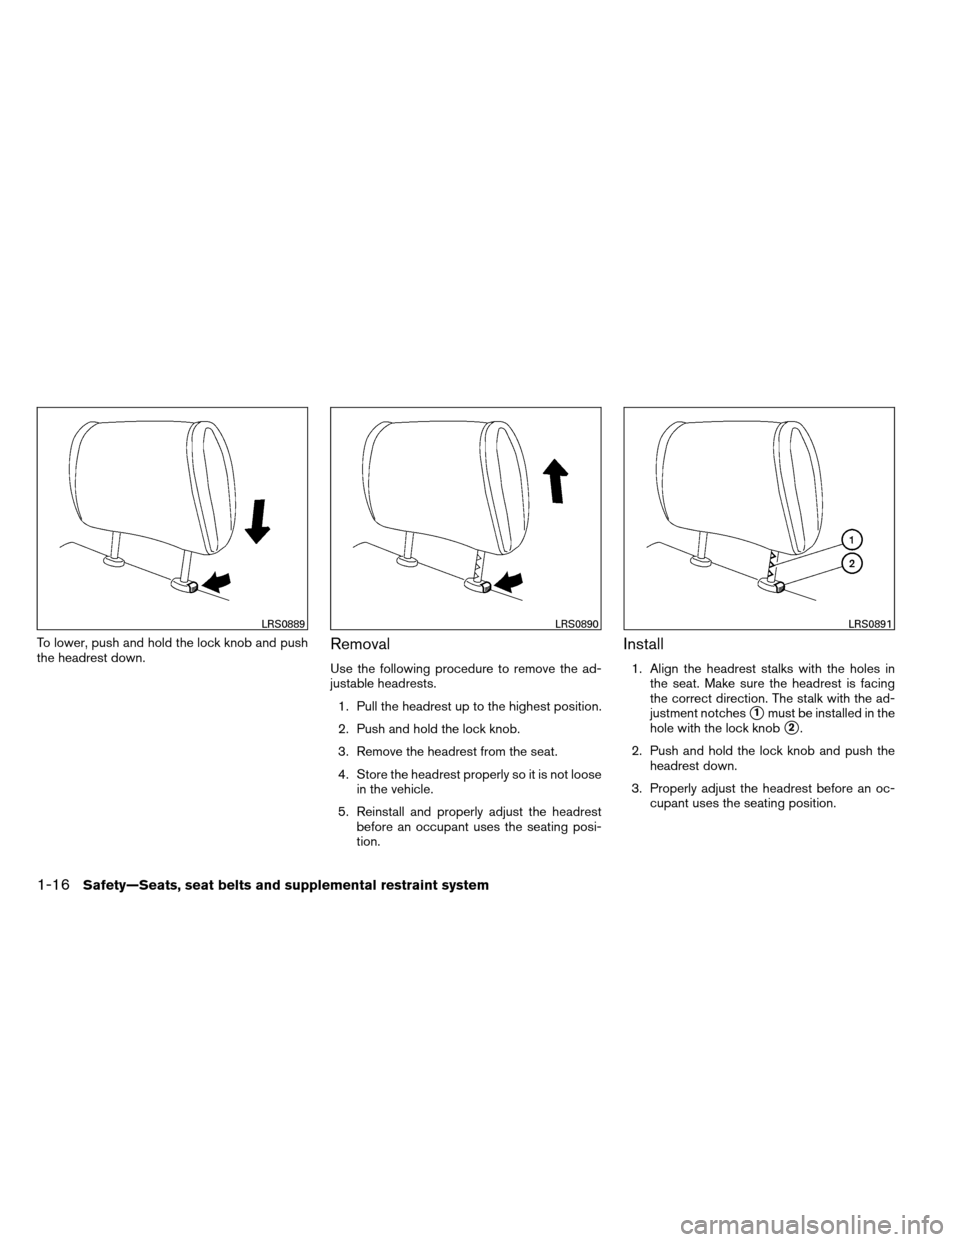 NISSAN ARMADA 2012 1.G Owners Manual To lower, push and hold the lock knob and push
the headrest down.Removal
Use the following procedure to remove the ad-
justable headrests.1. Pull the headrest up to the highest position.
2. Push and h